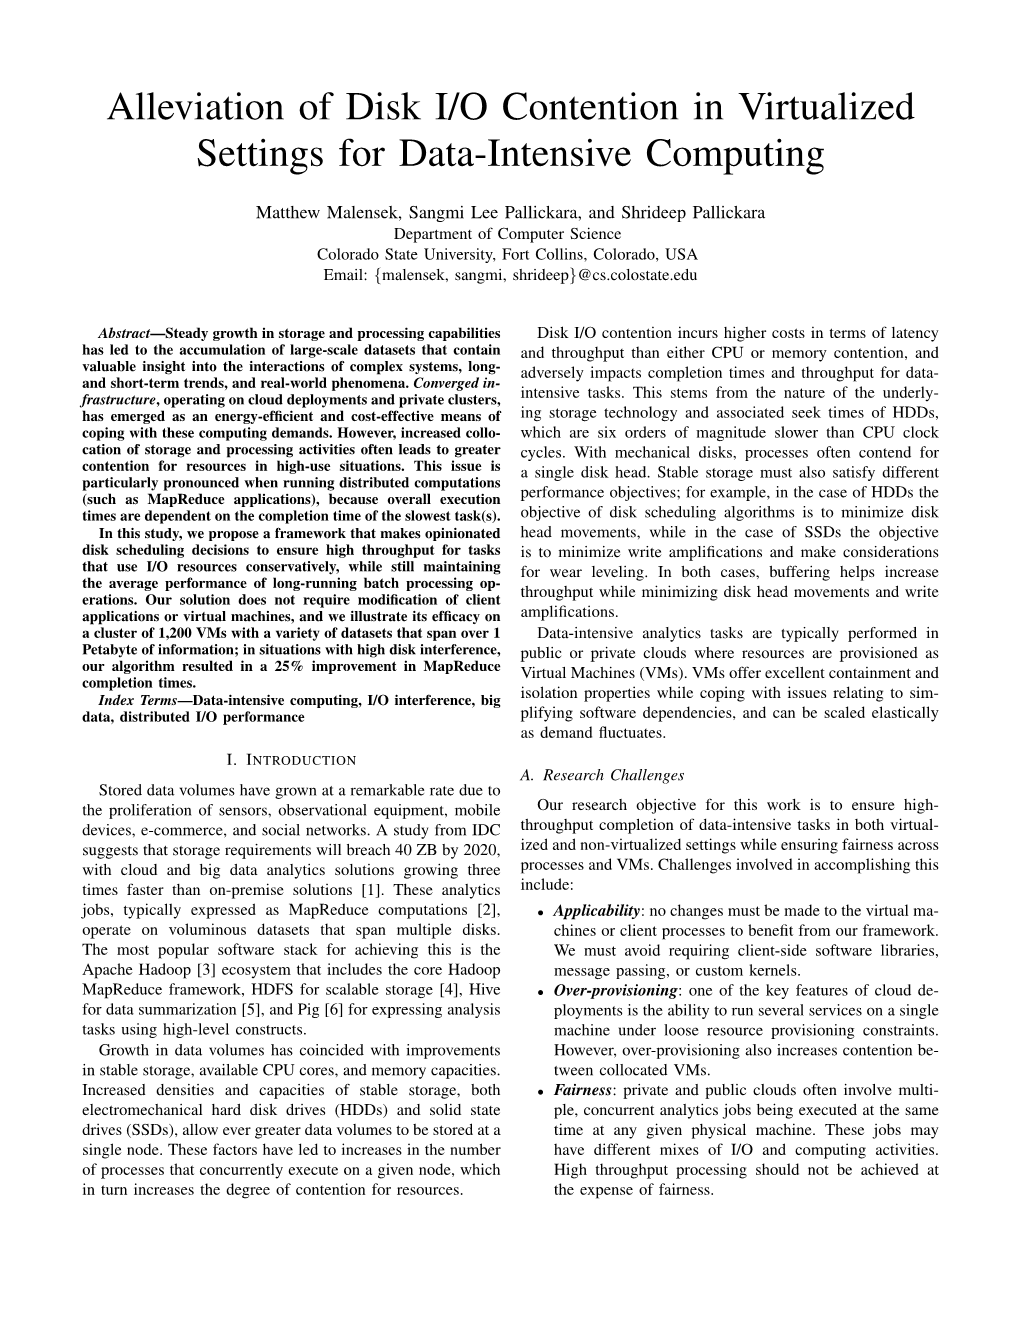 Alleviation of Disk I/O Contention in Virtualized Settings for Data-Intensive Computing